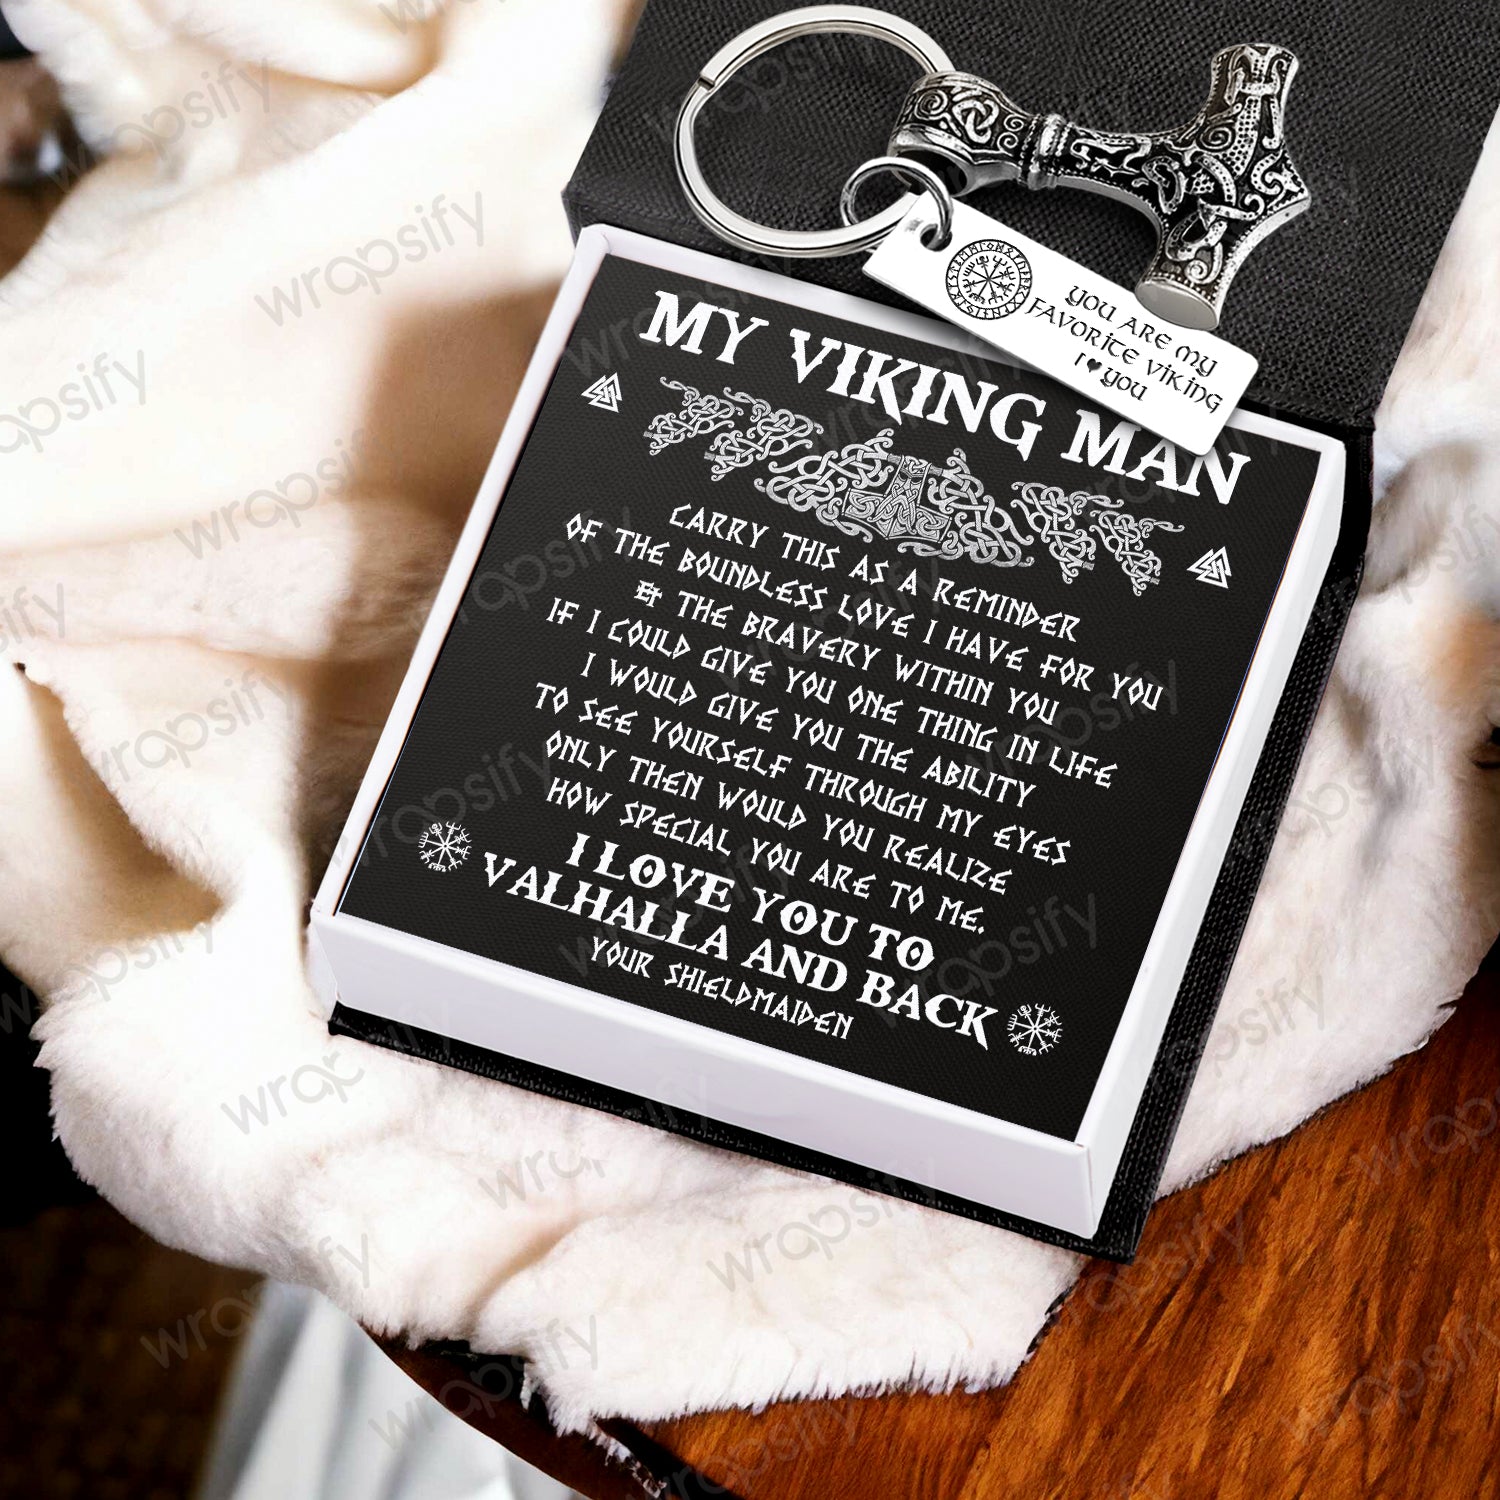 Viking Thor Keychain - Viking - To My Viking Man - How Special You Are To Me - Gkbv26008